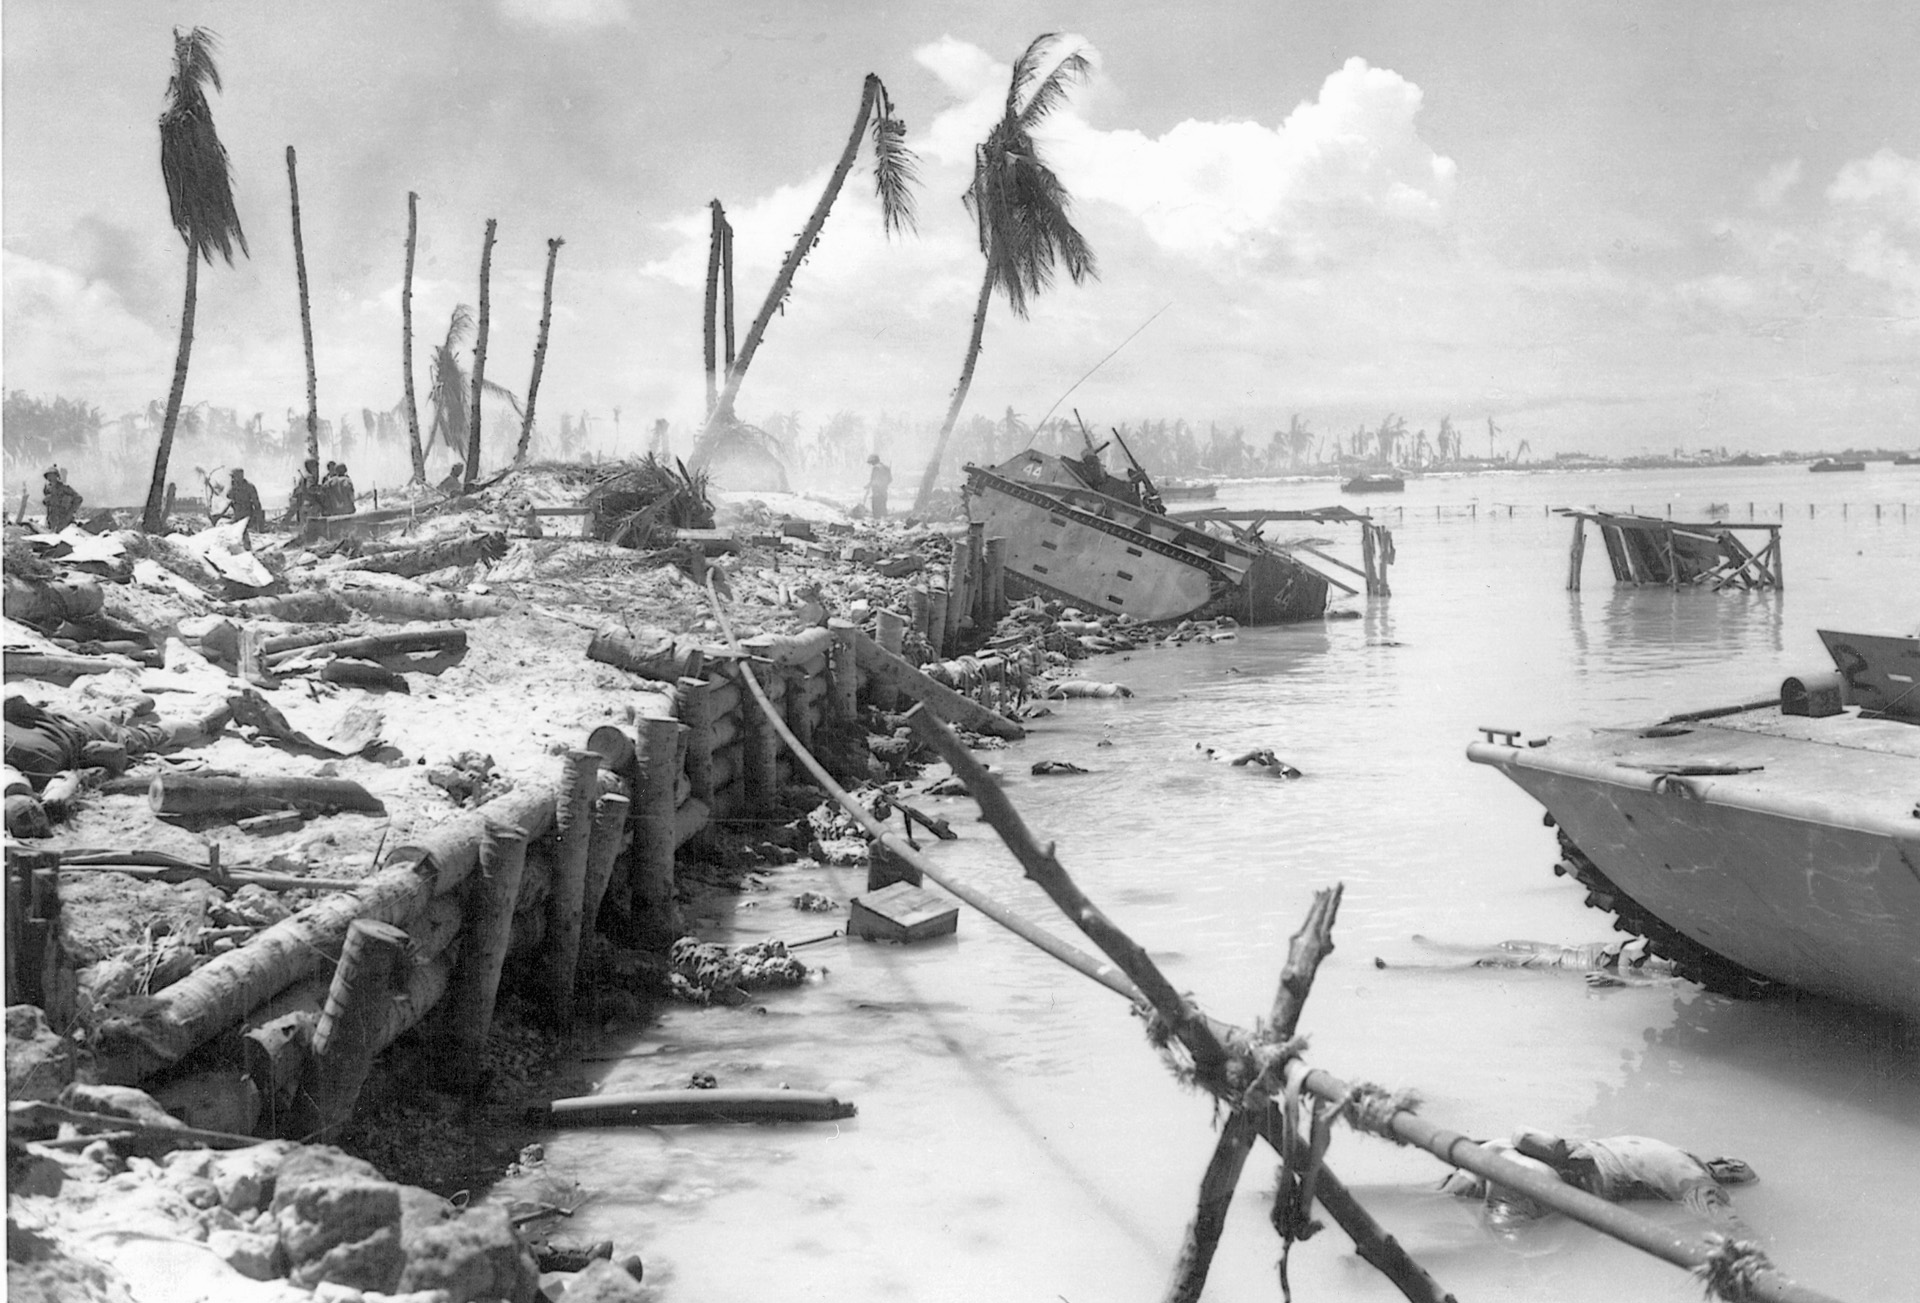 Pfc. Clayton Jay’s wrecked LVT 44 lies astride the log barrier on Red Beach 1. Other debris of war littlers the beach as the bodies of dead Marines float at the water’s edge. 